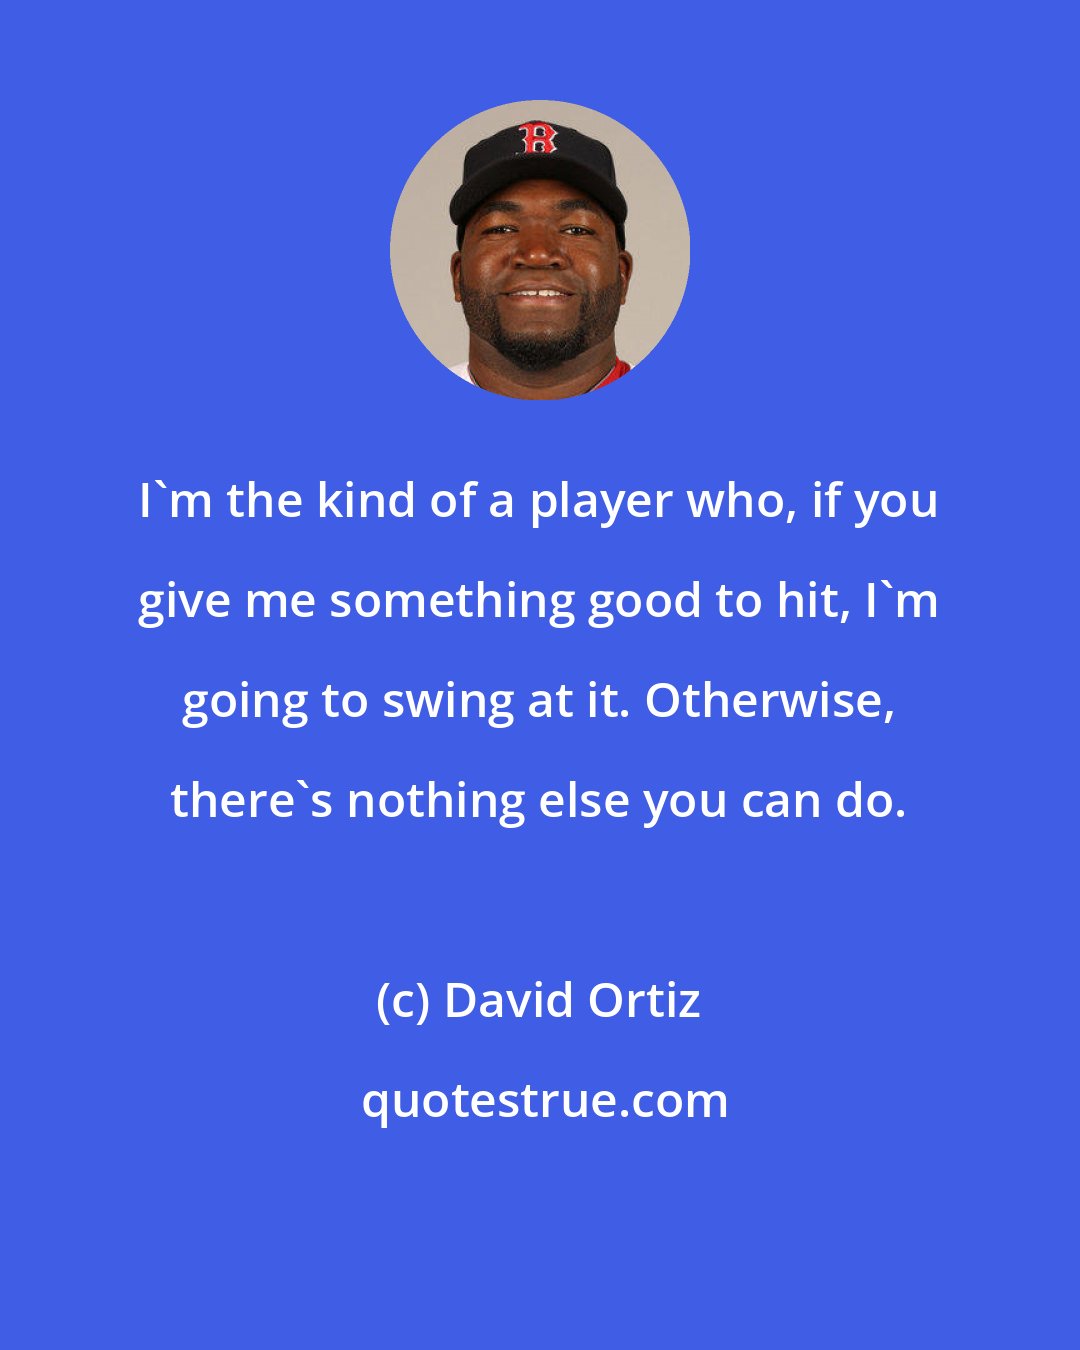 David Ortiz: I'm the kind of a player who, if you give me something good to hit, I'm going to swing at it. Otherwise, there's nothing else you can do.